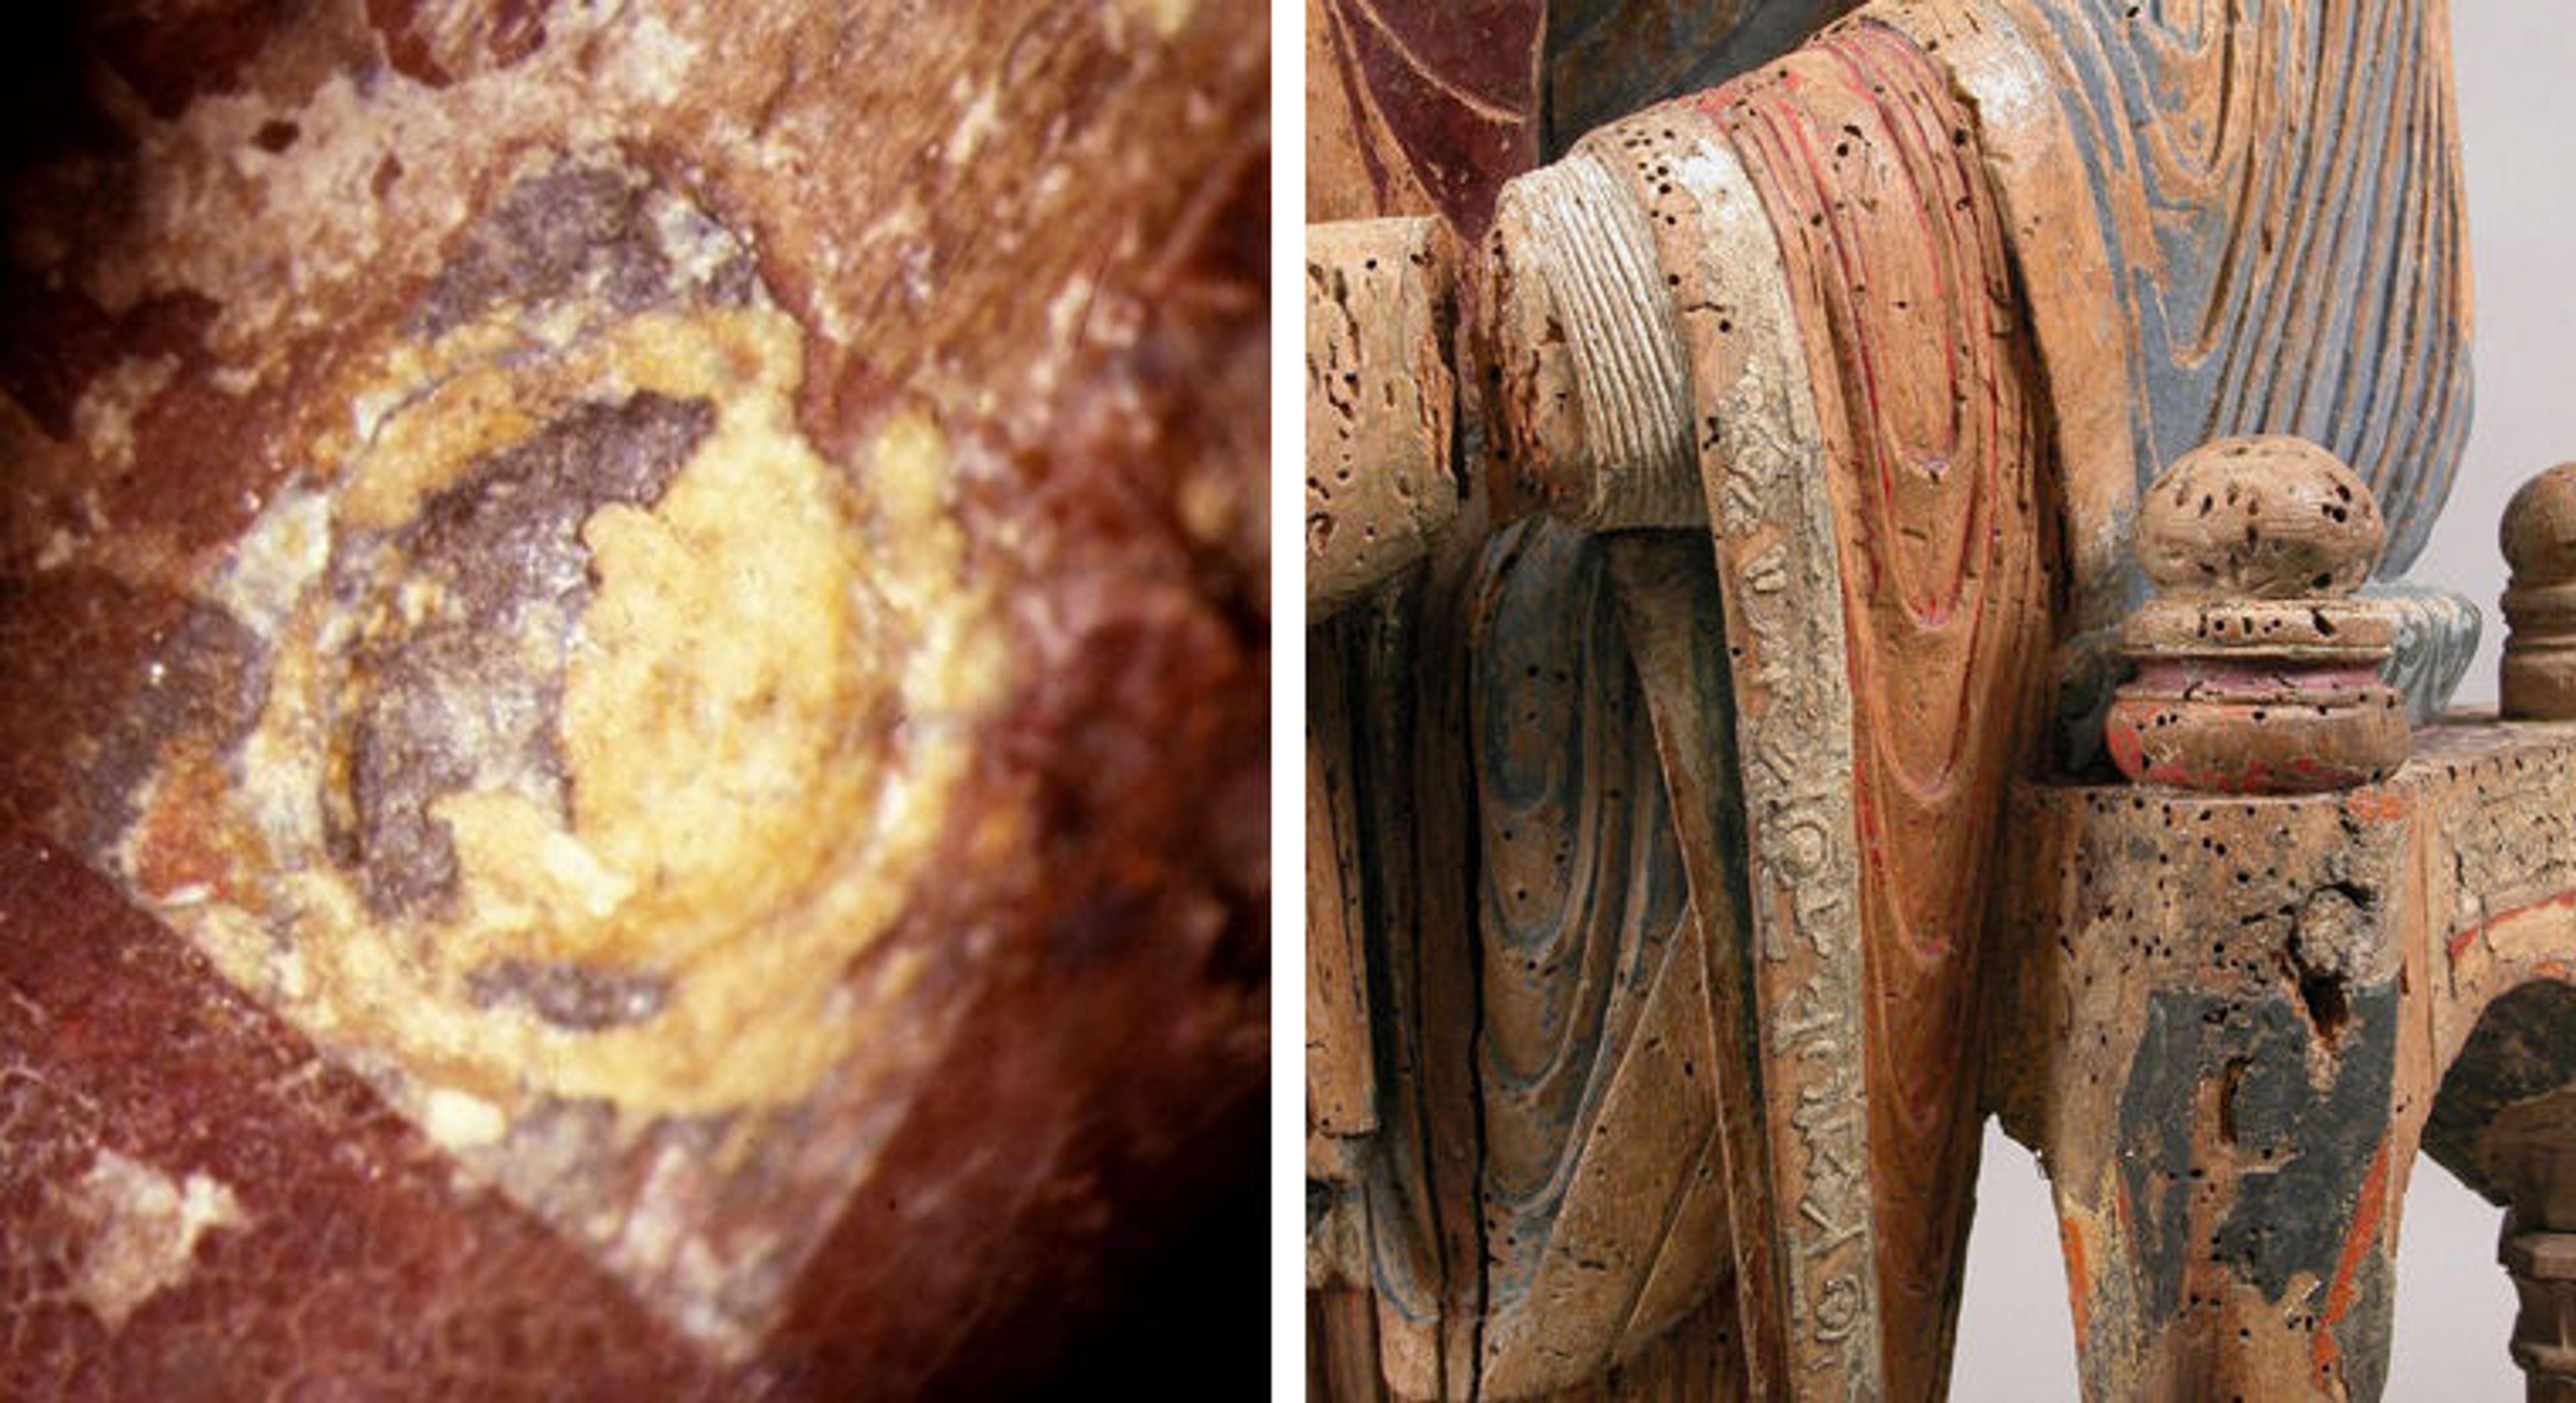 Left: X-ray view of the polychrome paint on a twelfth-century sculpture of the Virgin and Child. Right: Detail view of the left arm and throne of the same sculpture